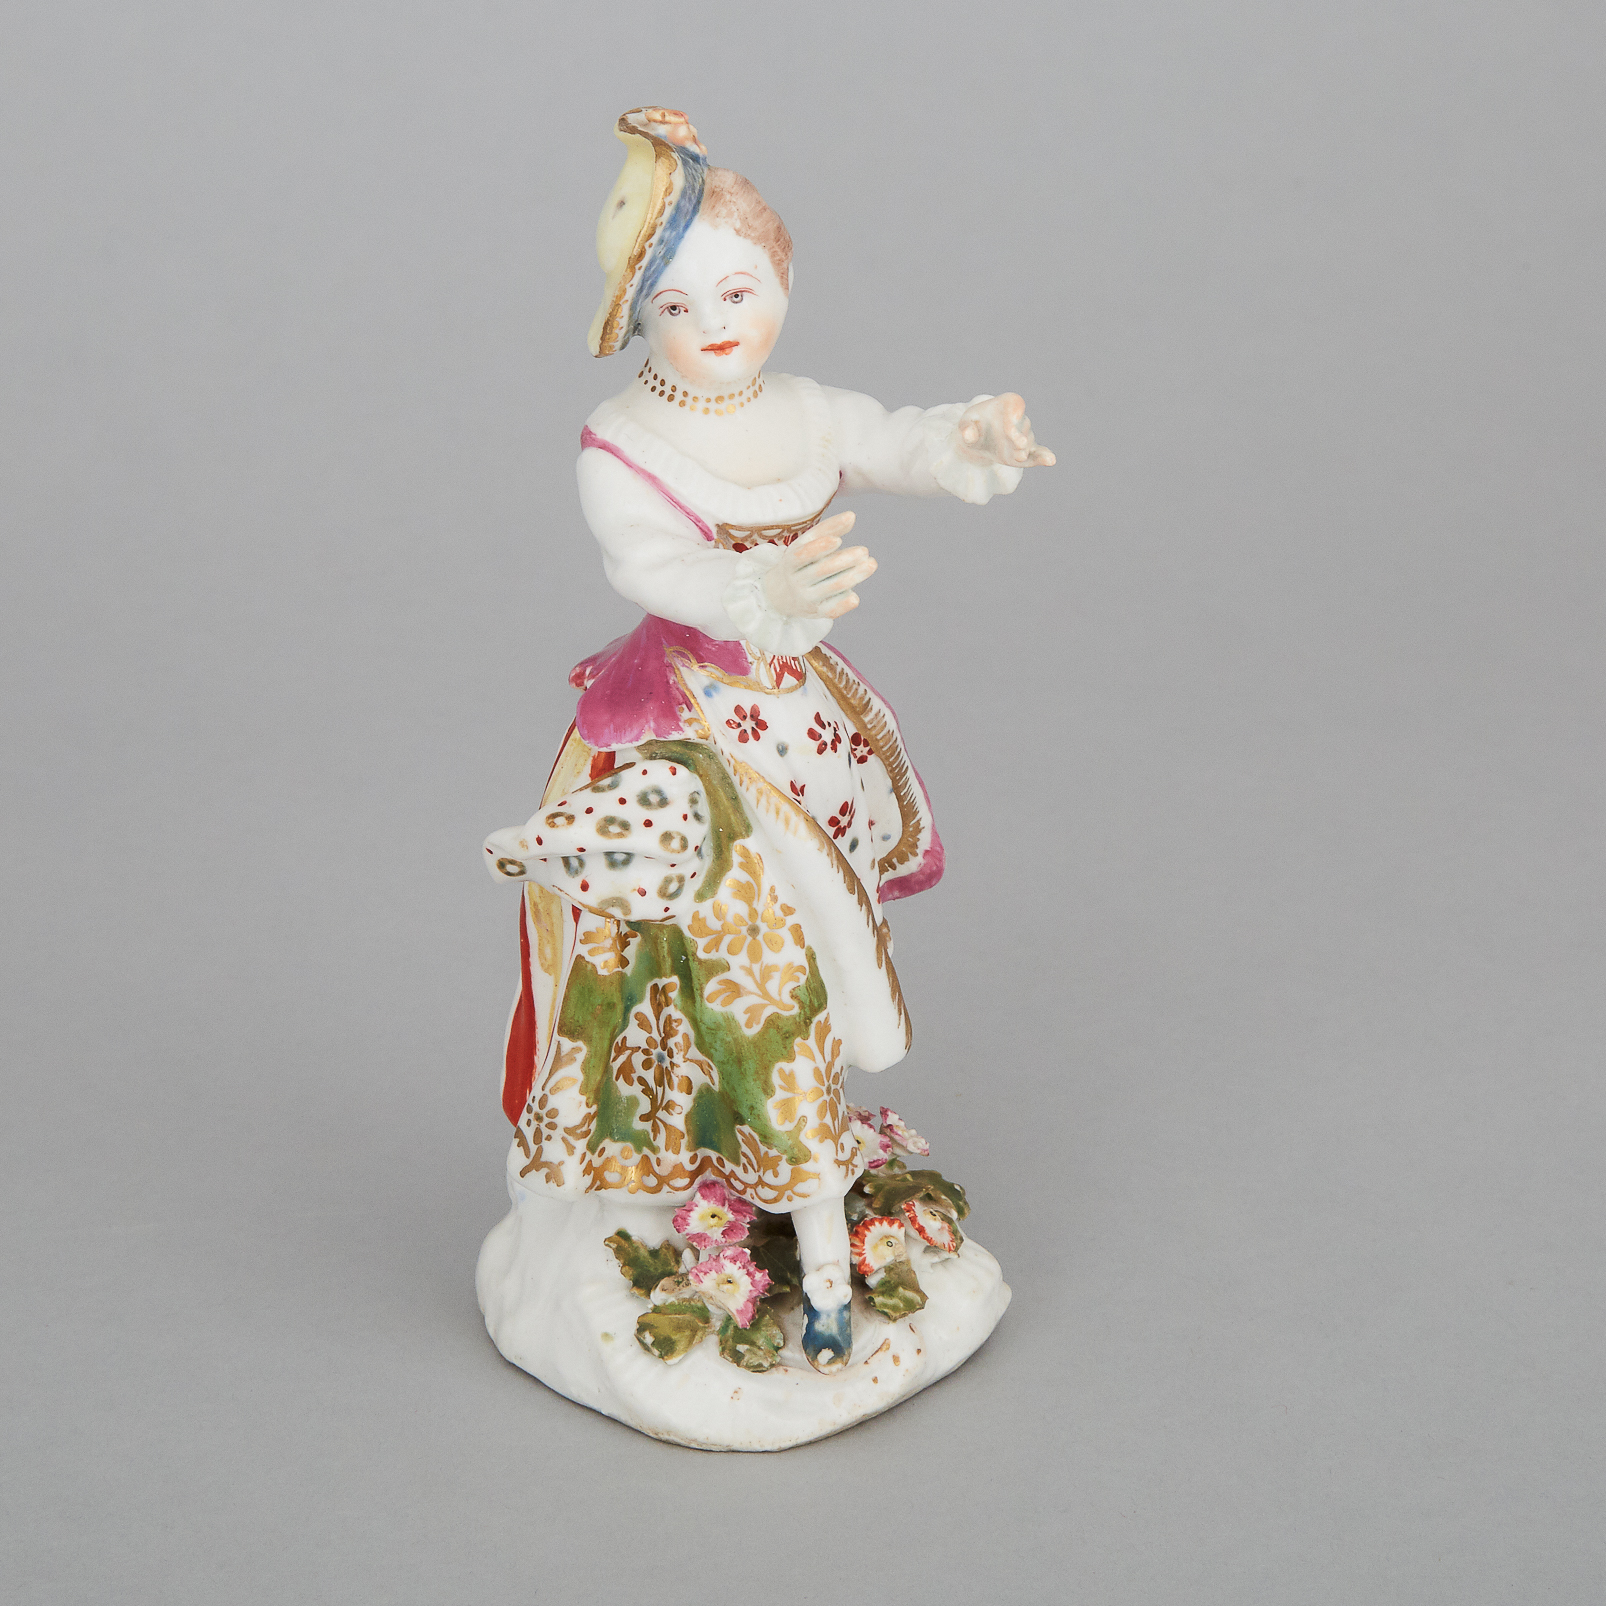 Bow Figure of a 'New Dancer', c.1765